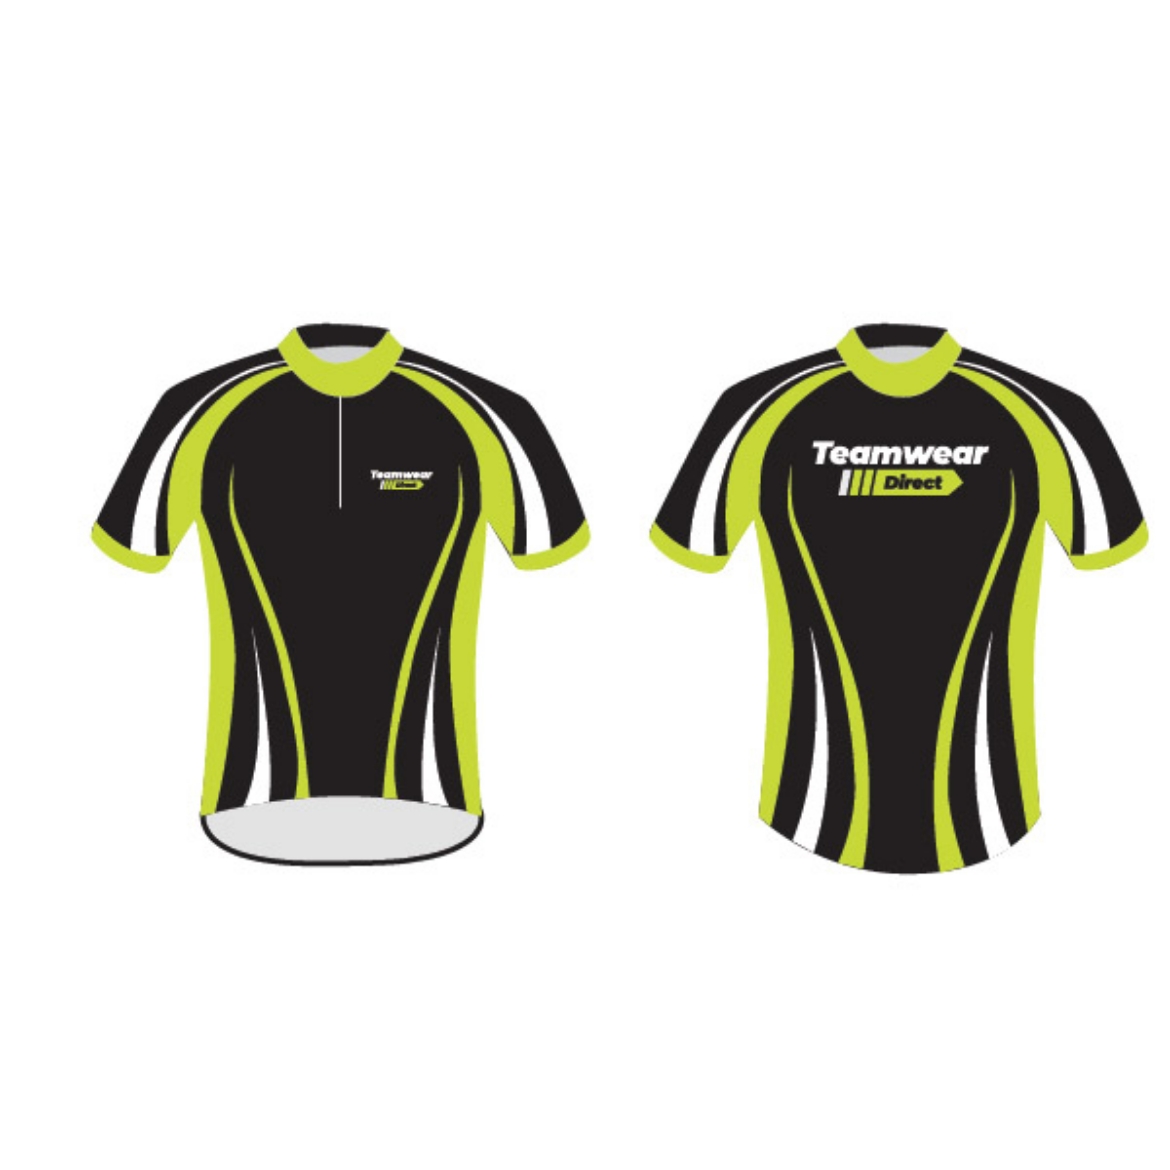 Picture of Teamwear Direct Cycling Jersey